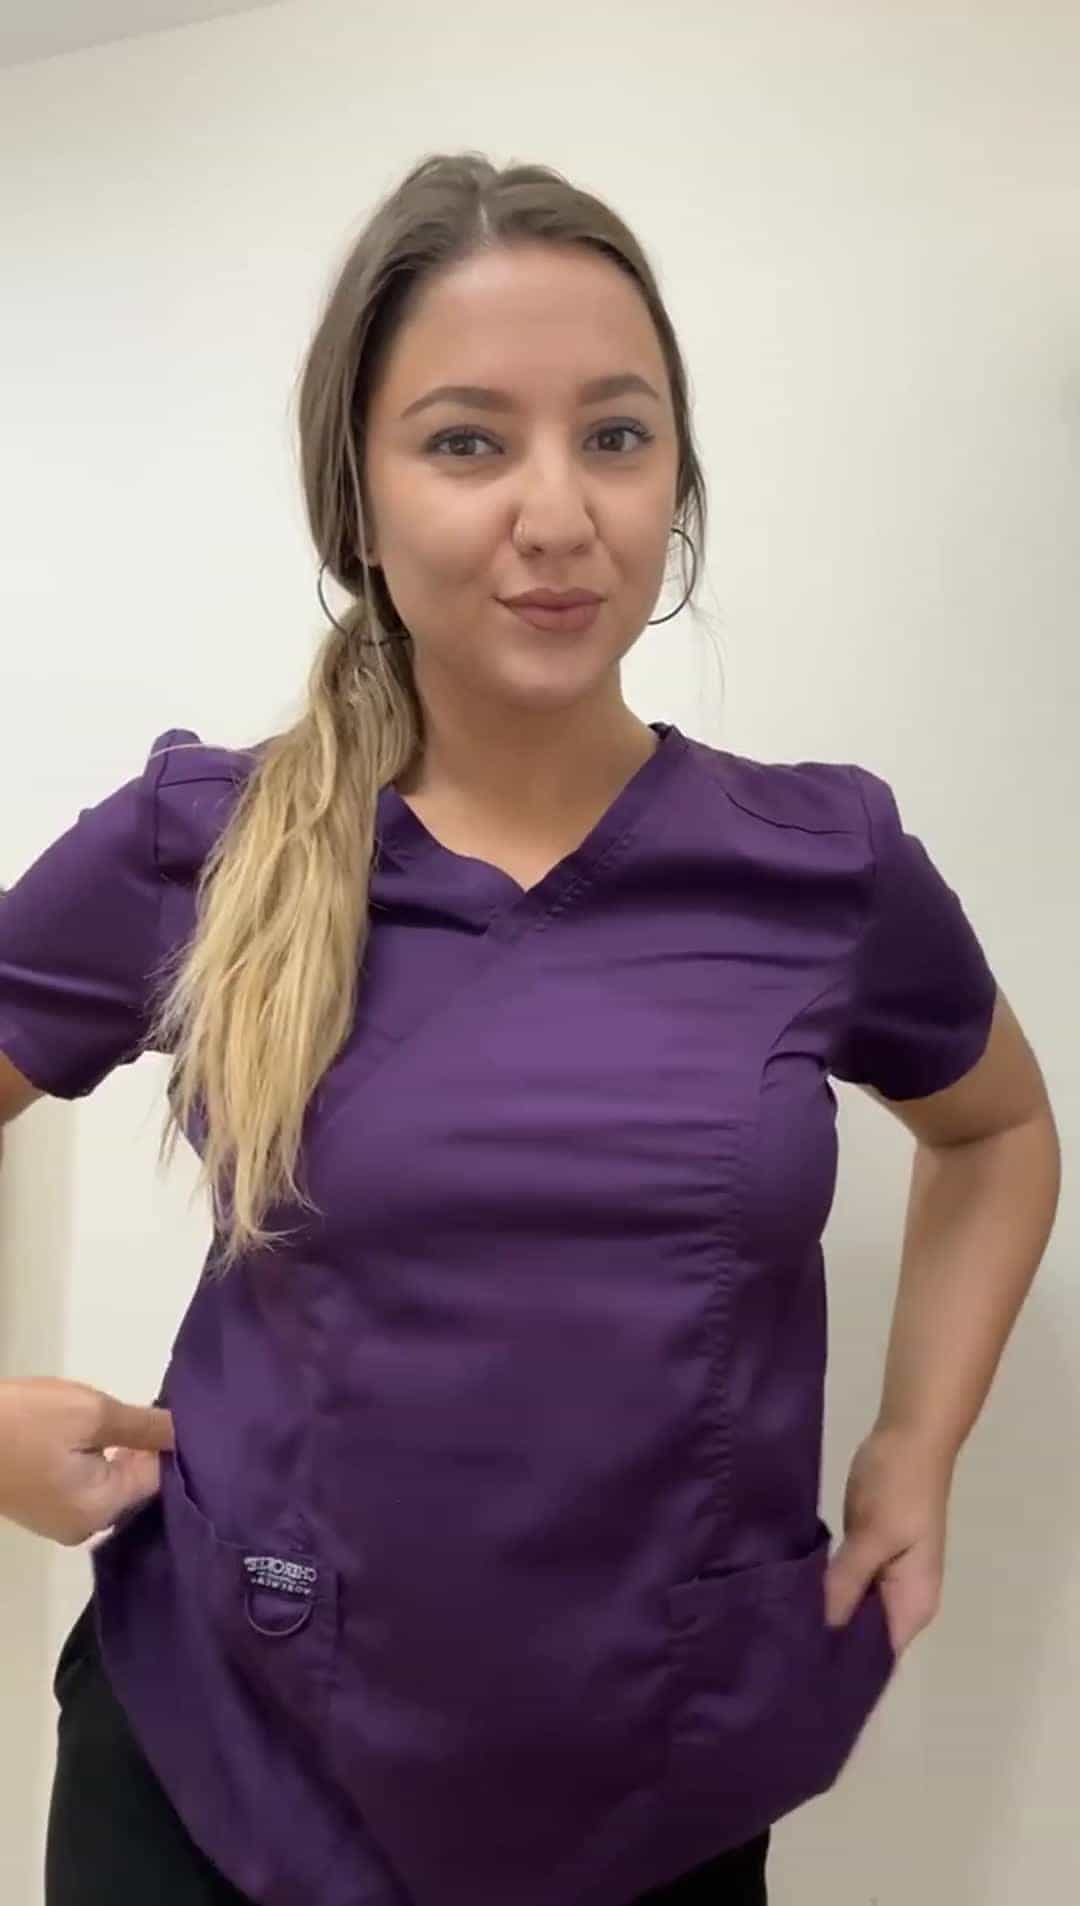 First date idea: Tittyfucking me on the in hospital while working, yay or nay 👩‍⚕️🥵